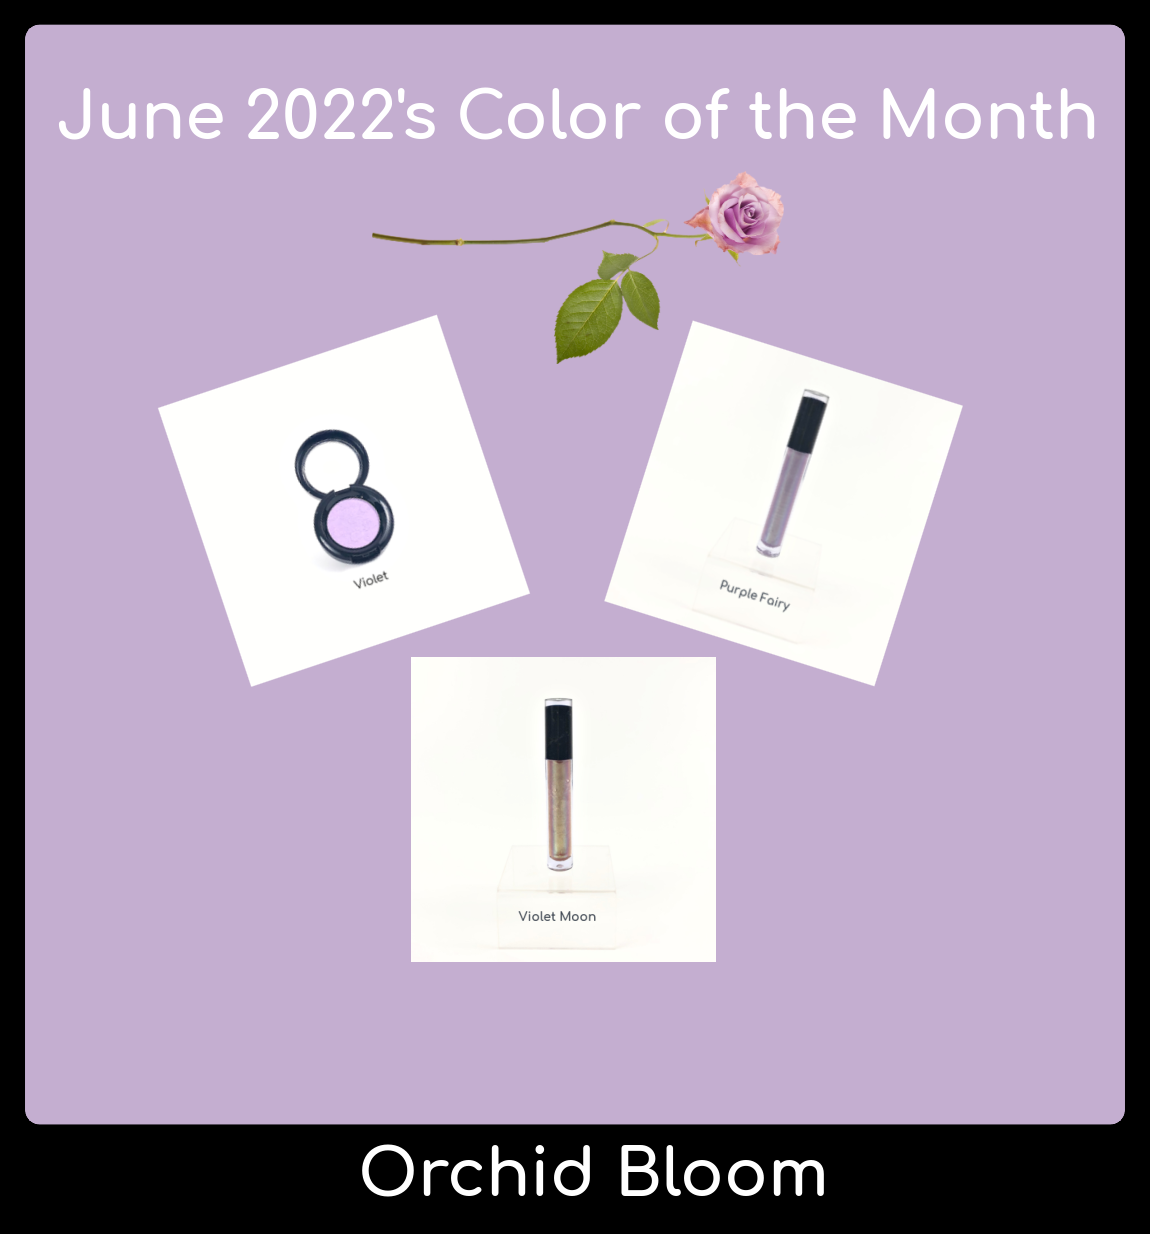 June 2022's Color of the Month is Orchid Bloom